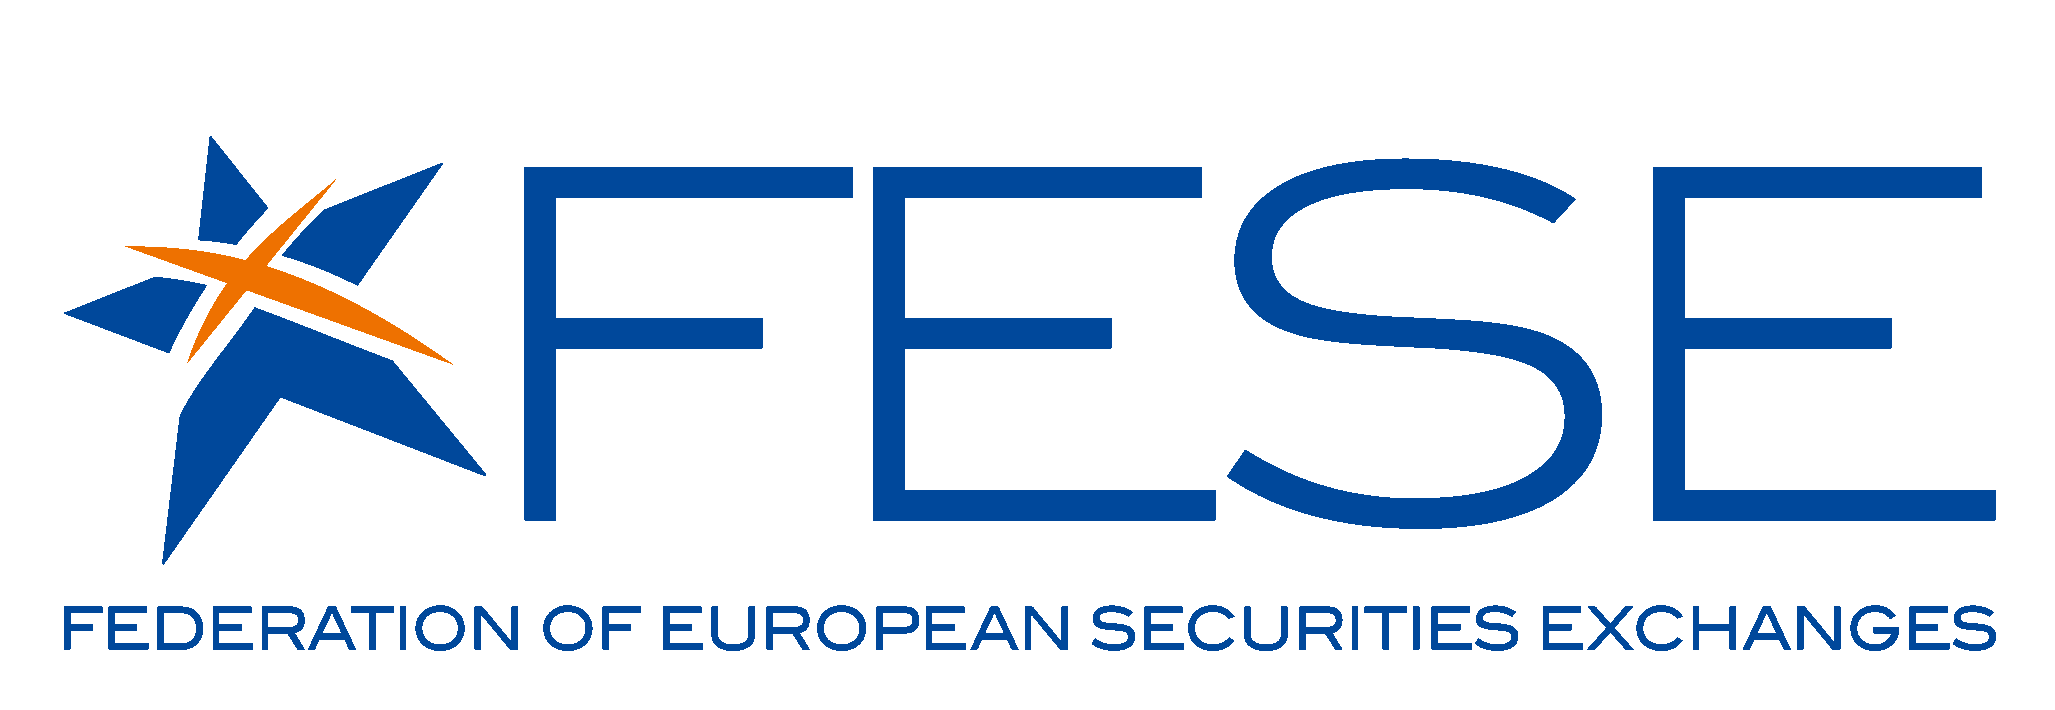 logo for Federation of European Securities Exchanges